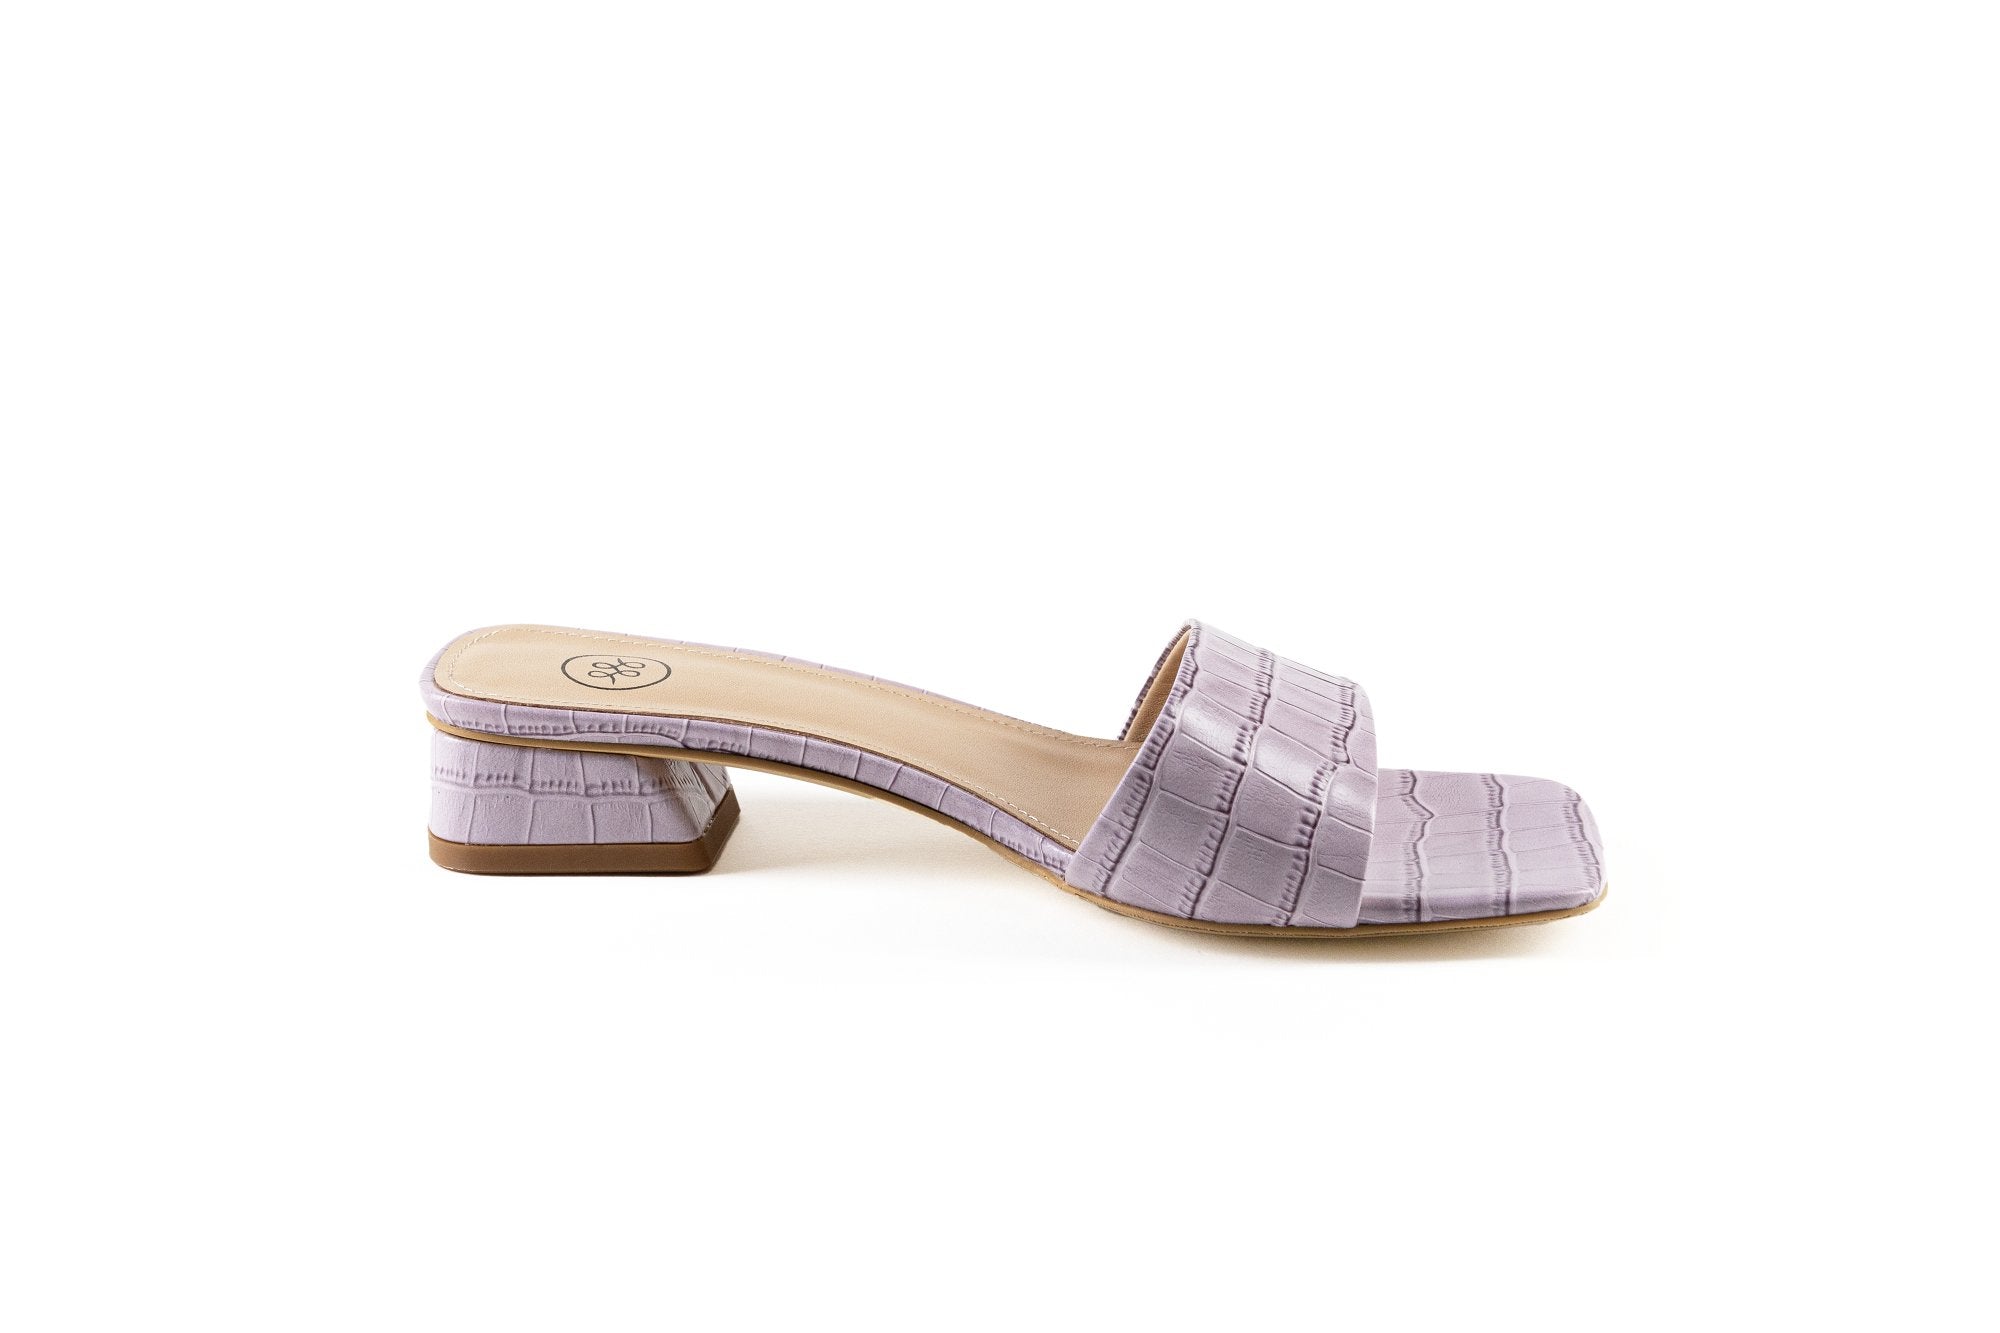 Marbella Sandal Lilac Flats by Sole Shoes NZ F18-36